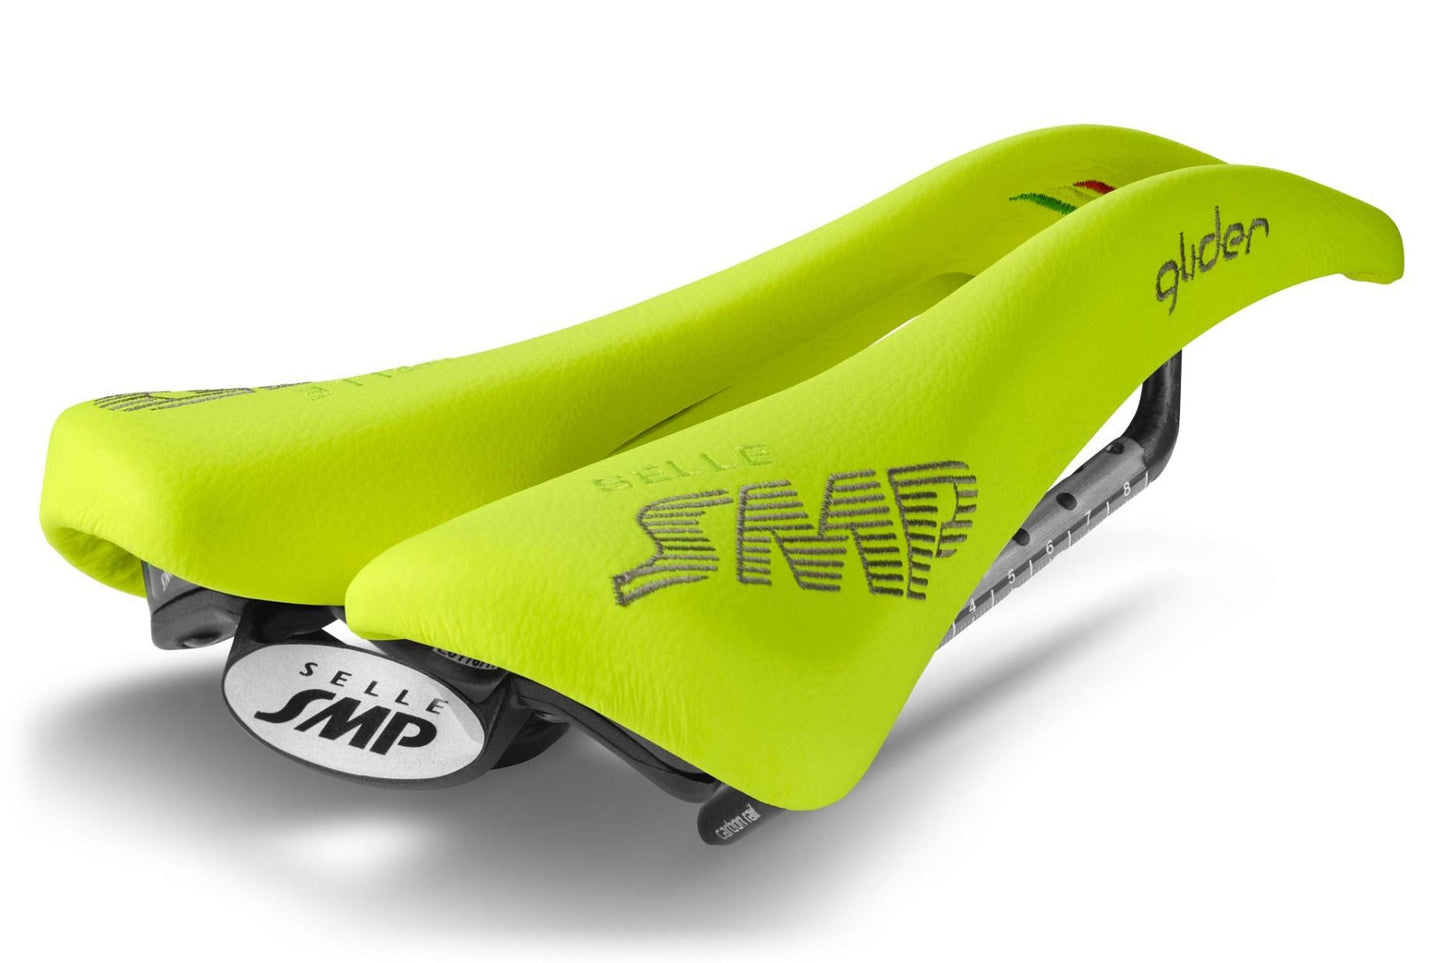 Selle SMP Glider Saddle with Carbon Rails (Fluro Yellow)